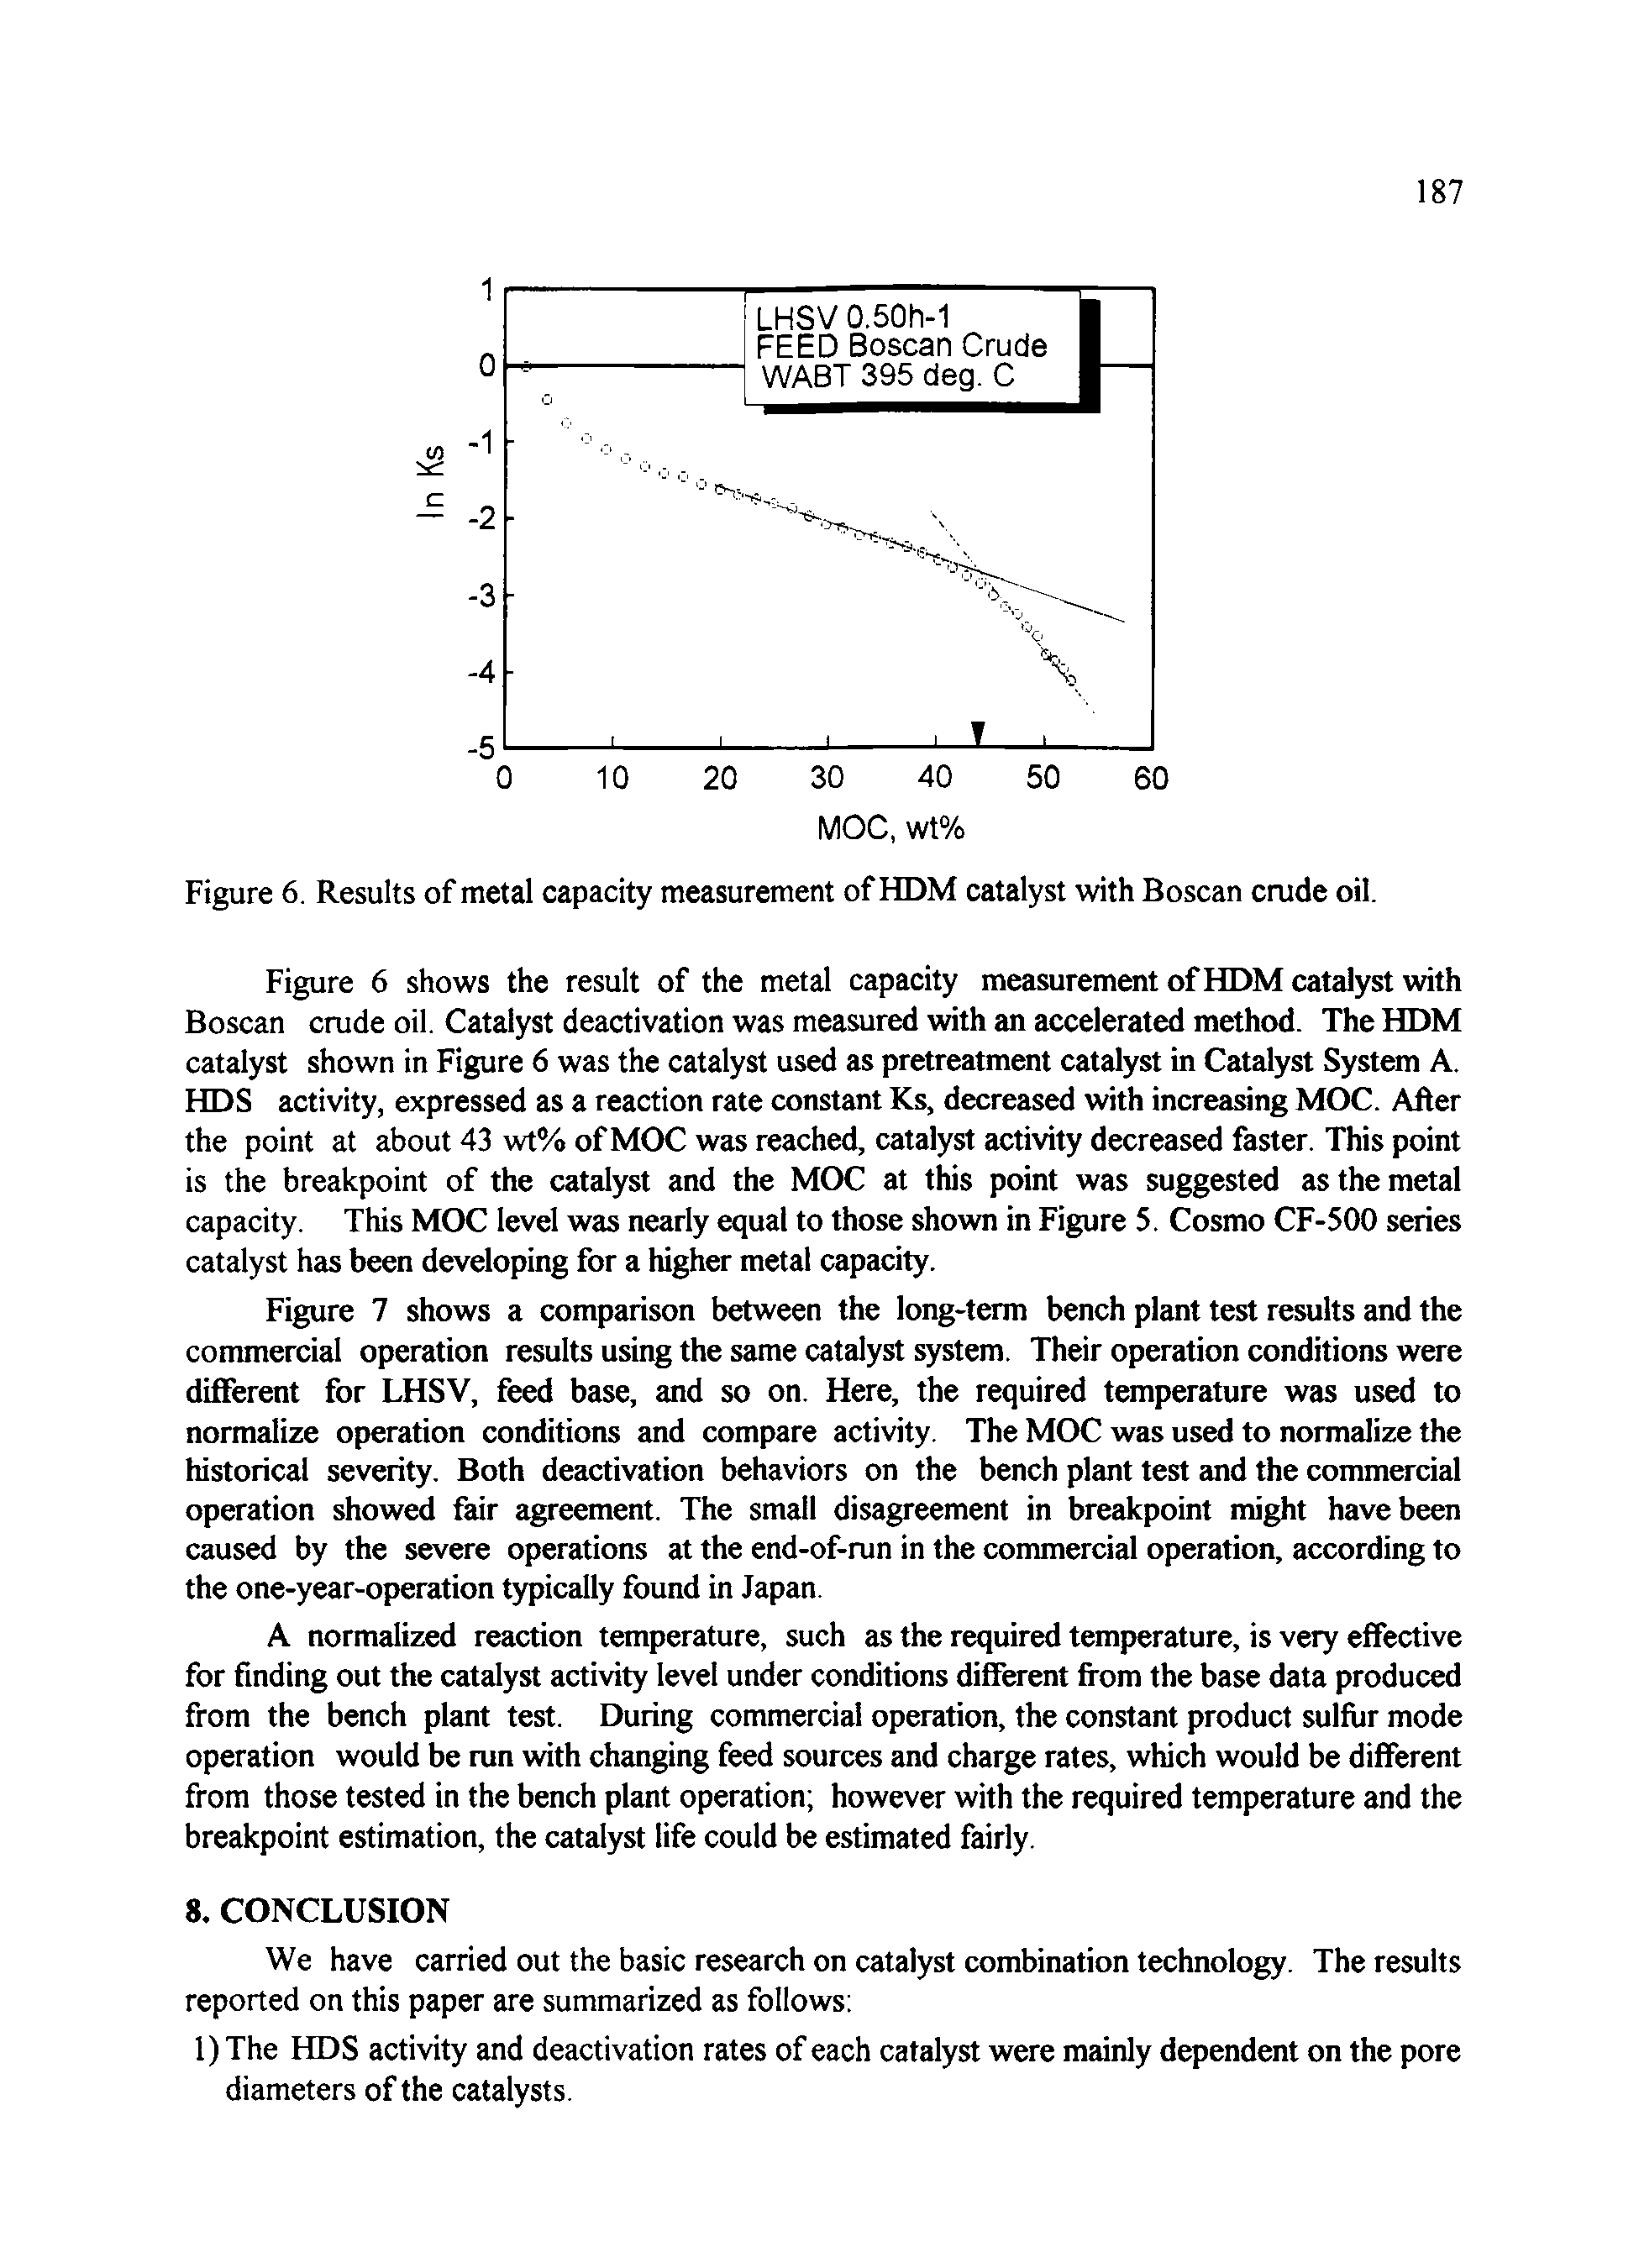 Figure 6 shows the result of the metal capacity measurement of HDM catalyst with Boscan crude oil. Catalyst deactivation was measured with an accelerated method. The HDM catalyst shown in Figure 6 was the catalyst used as pretreatment catalyst in Catalyst System A. HDS activity, expressed as a reaction rate constant Ks, decreased with increasing MOC. After the point at about 43 wt% of MOC was reached, catalyst activity decreased faster. This point is the breakpoint of the catalyst and the MOC at this point was suggested as the metal capacity. This MOC level was nearly equal to those shown in Figure 5. Cosmo CF-500 series catalyst has been developing for a higher metal capacity.